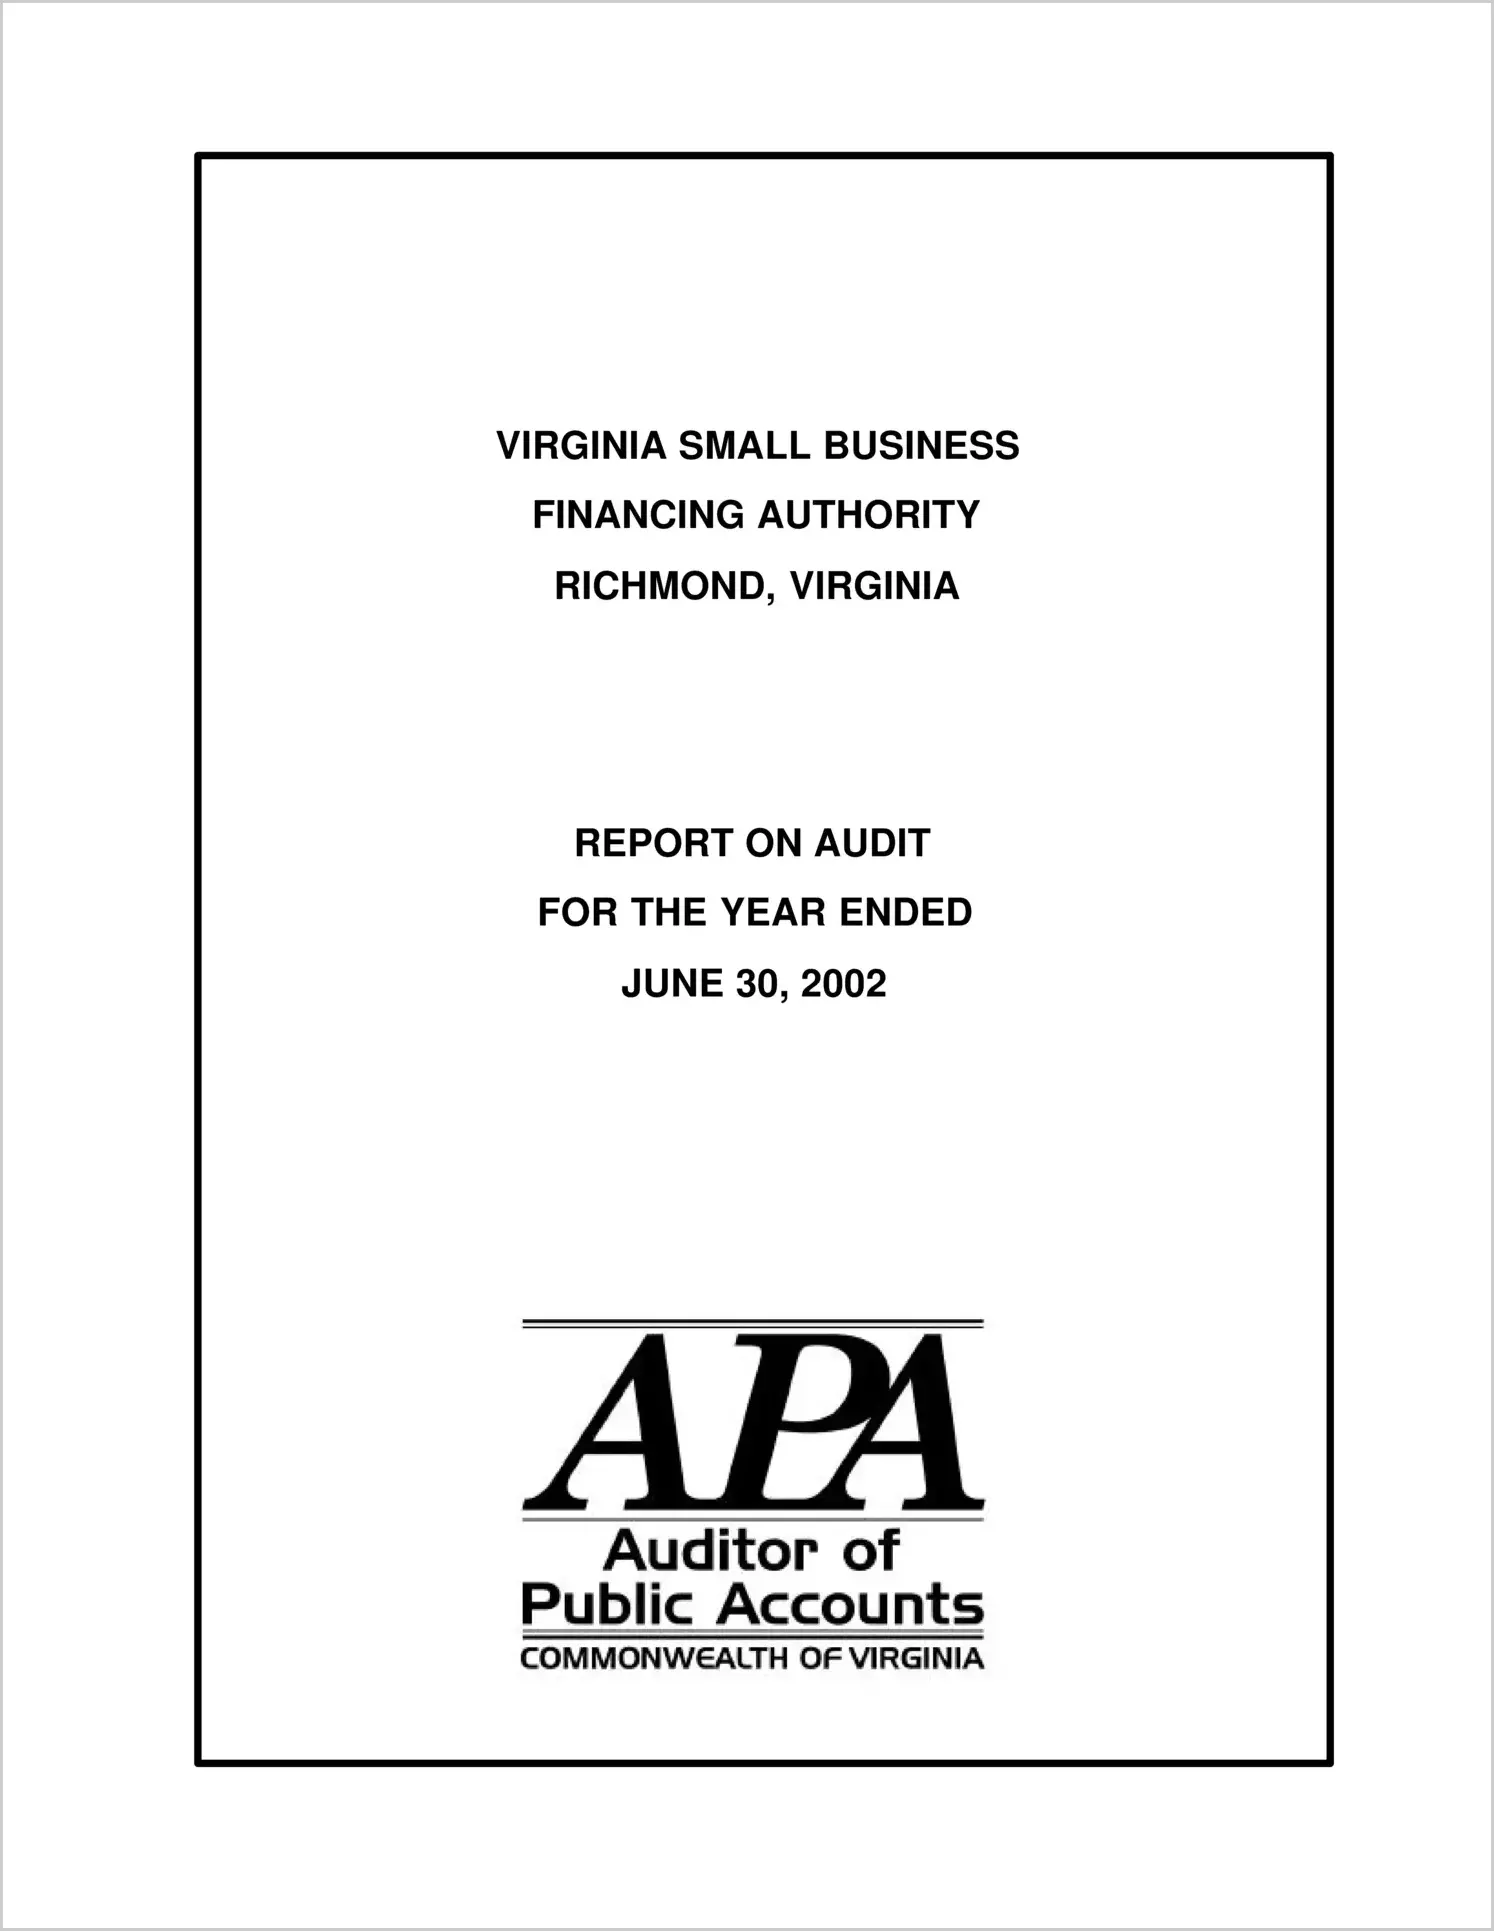 Virginia Small Business Financing Authority for the year ended June 30, 2002